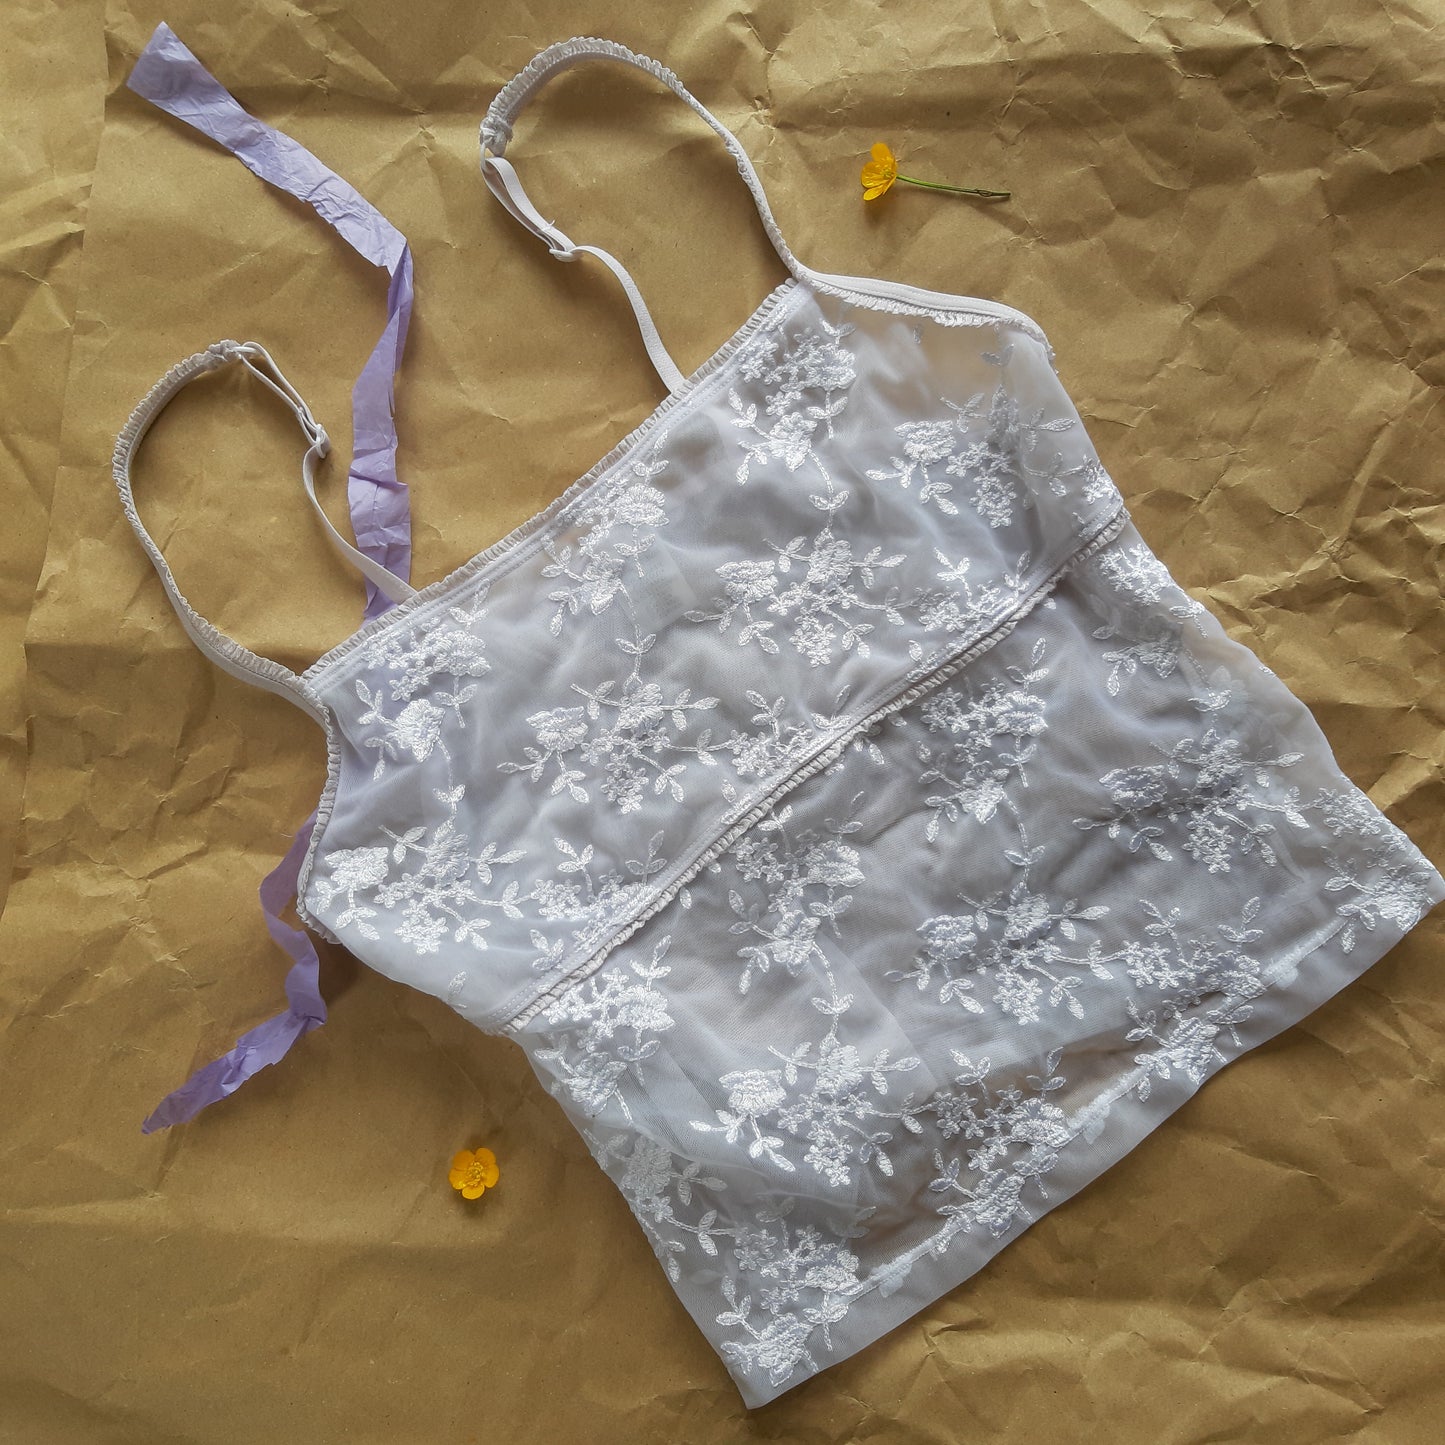 Sheer floral pattern camisole